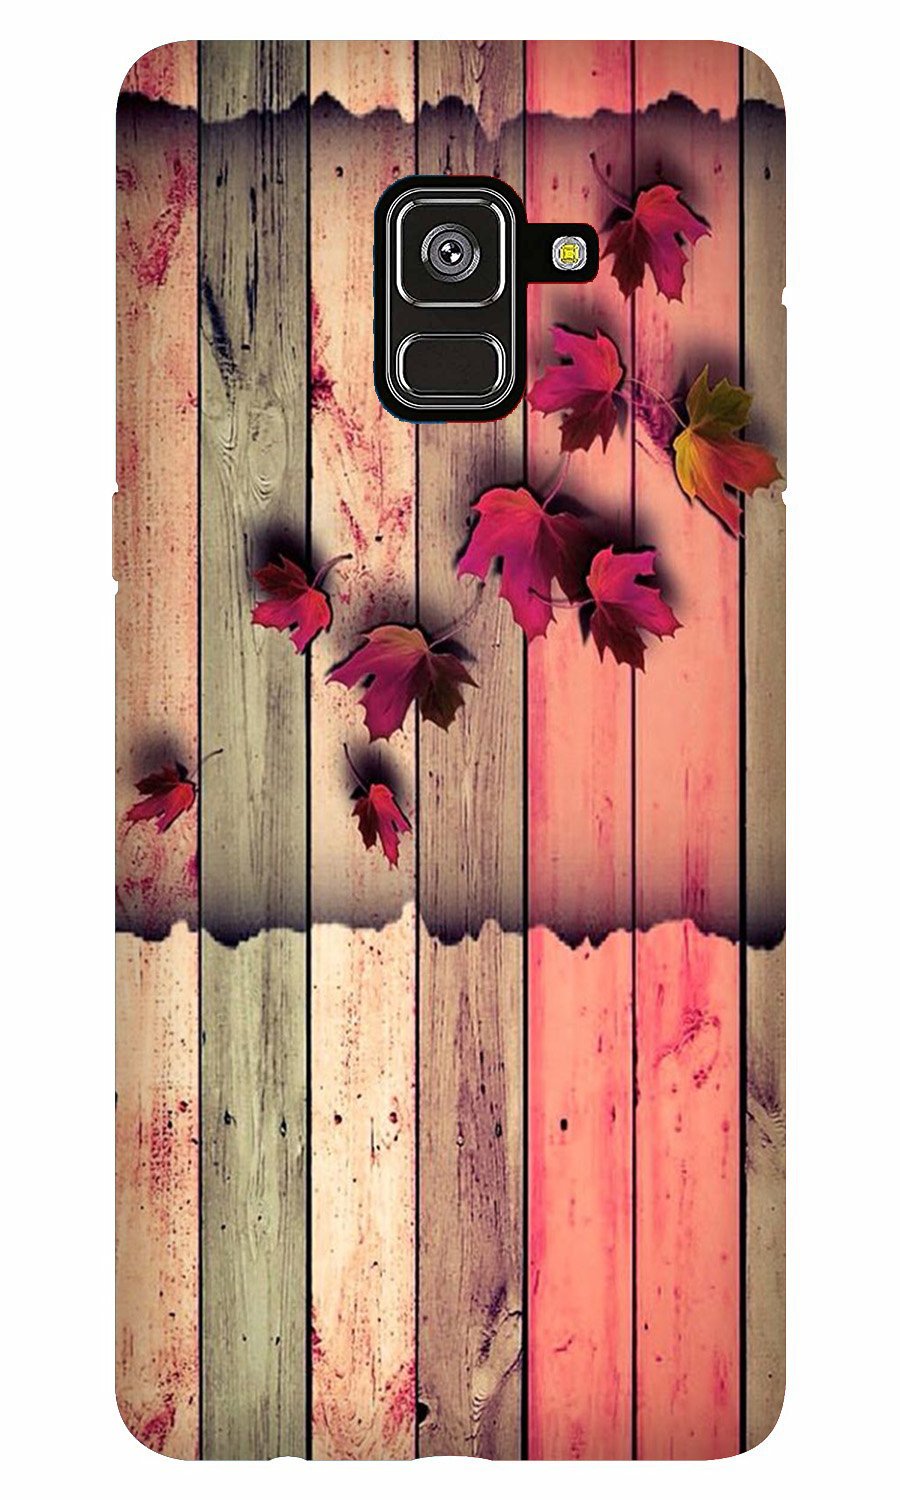 Wooden look2 Case for Galaxy A8 Plus